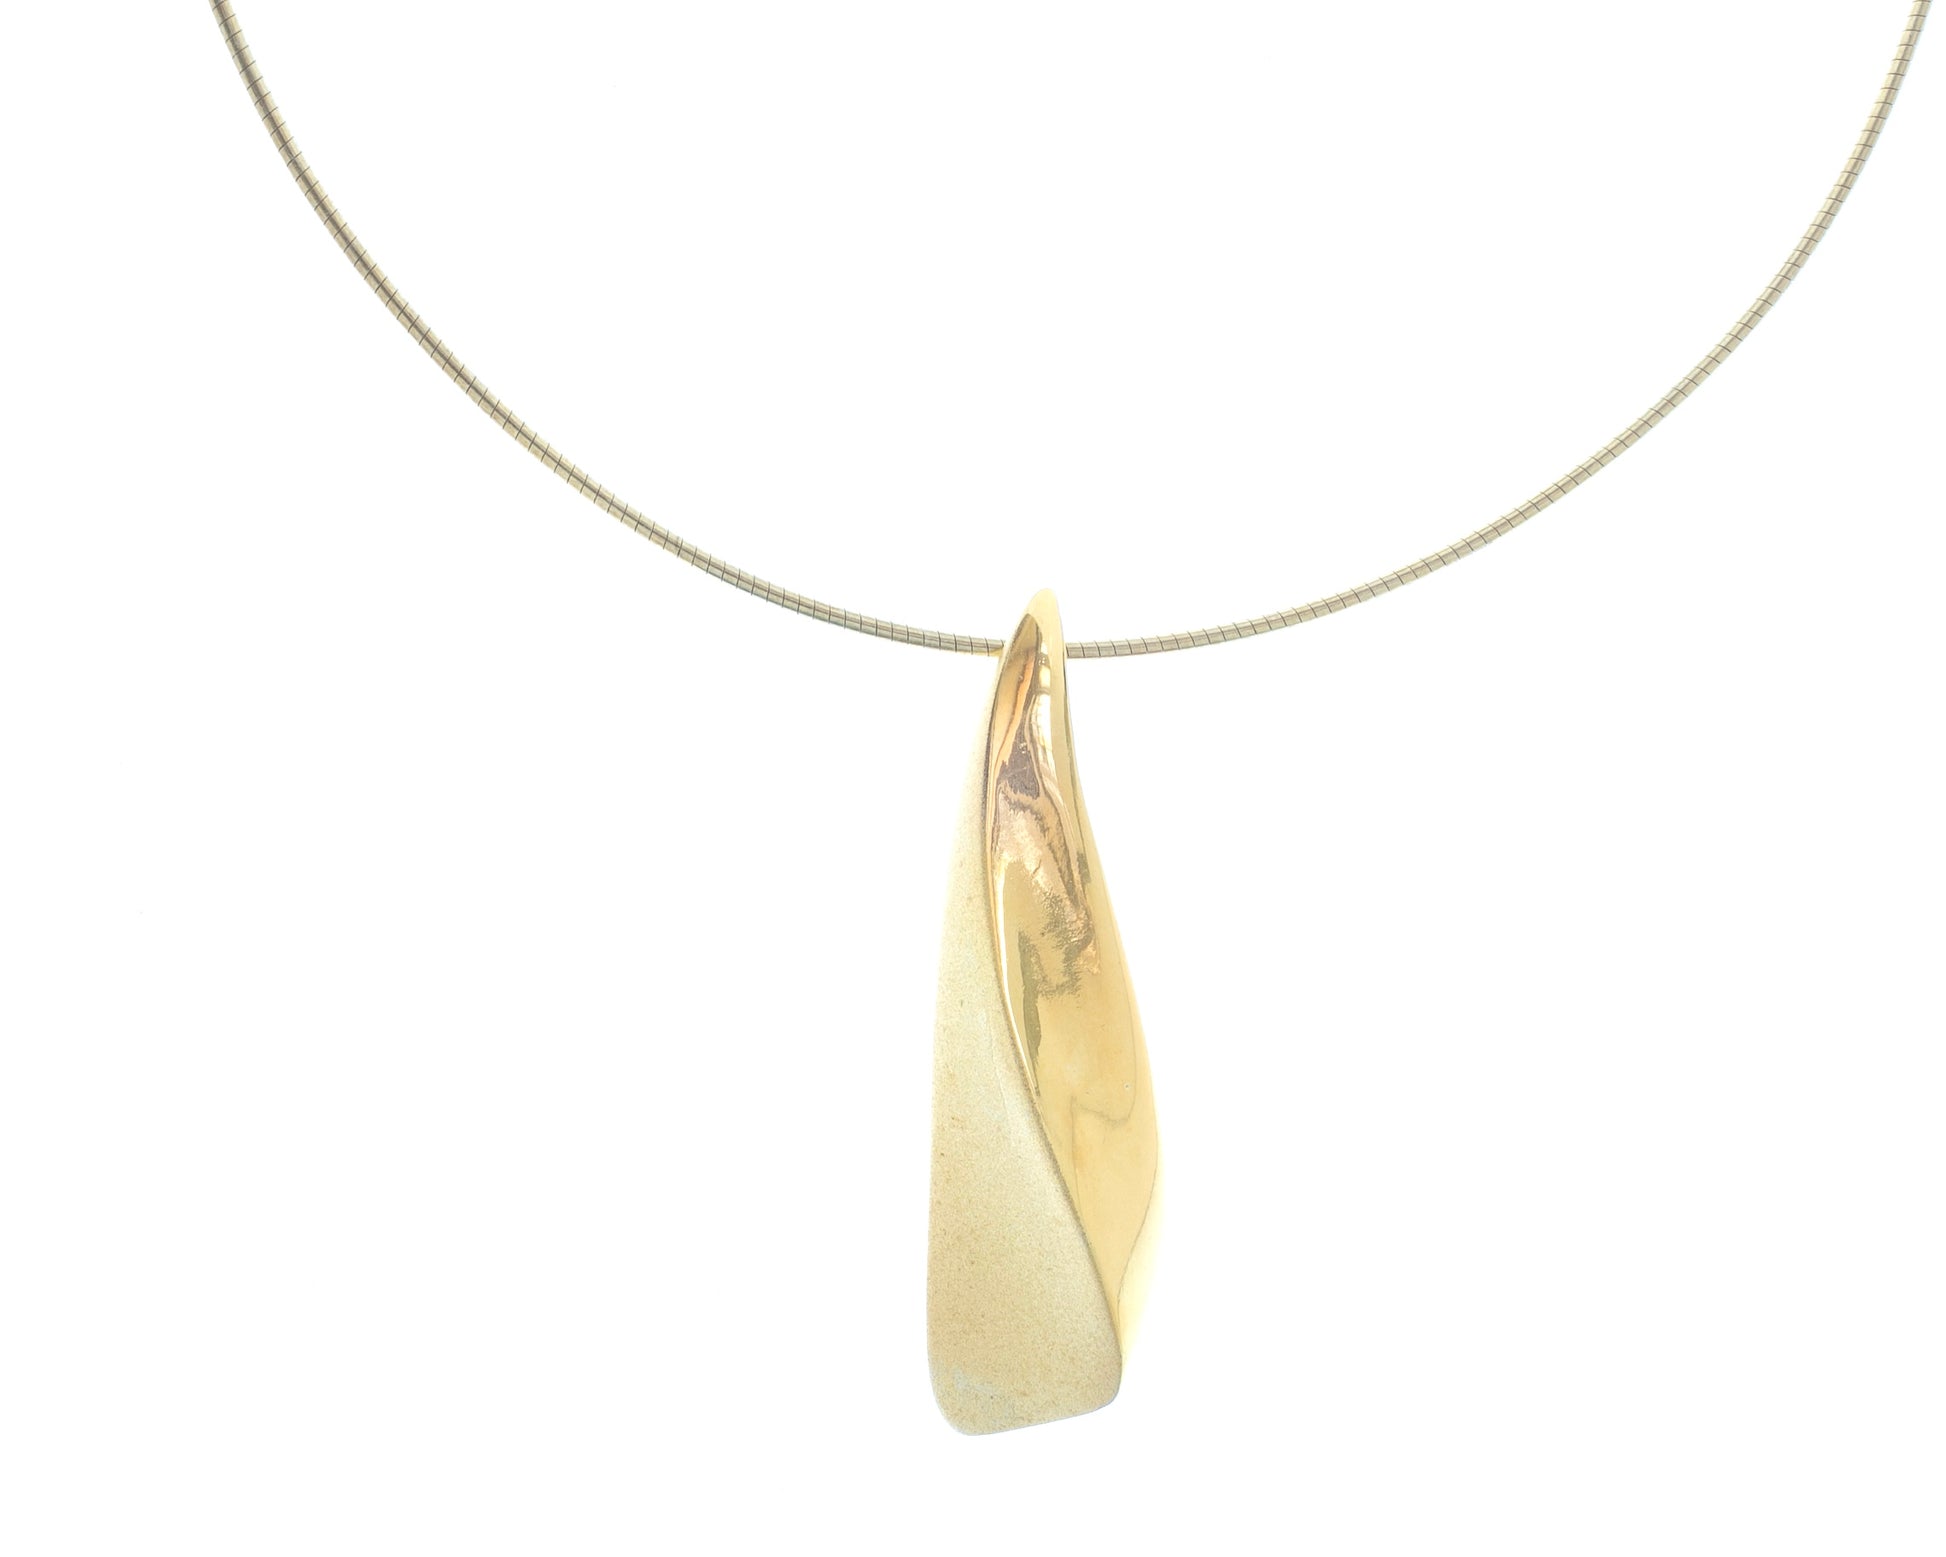 Wave shaped pendant on a 16 inch gold flexible chain.